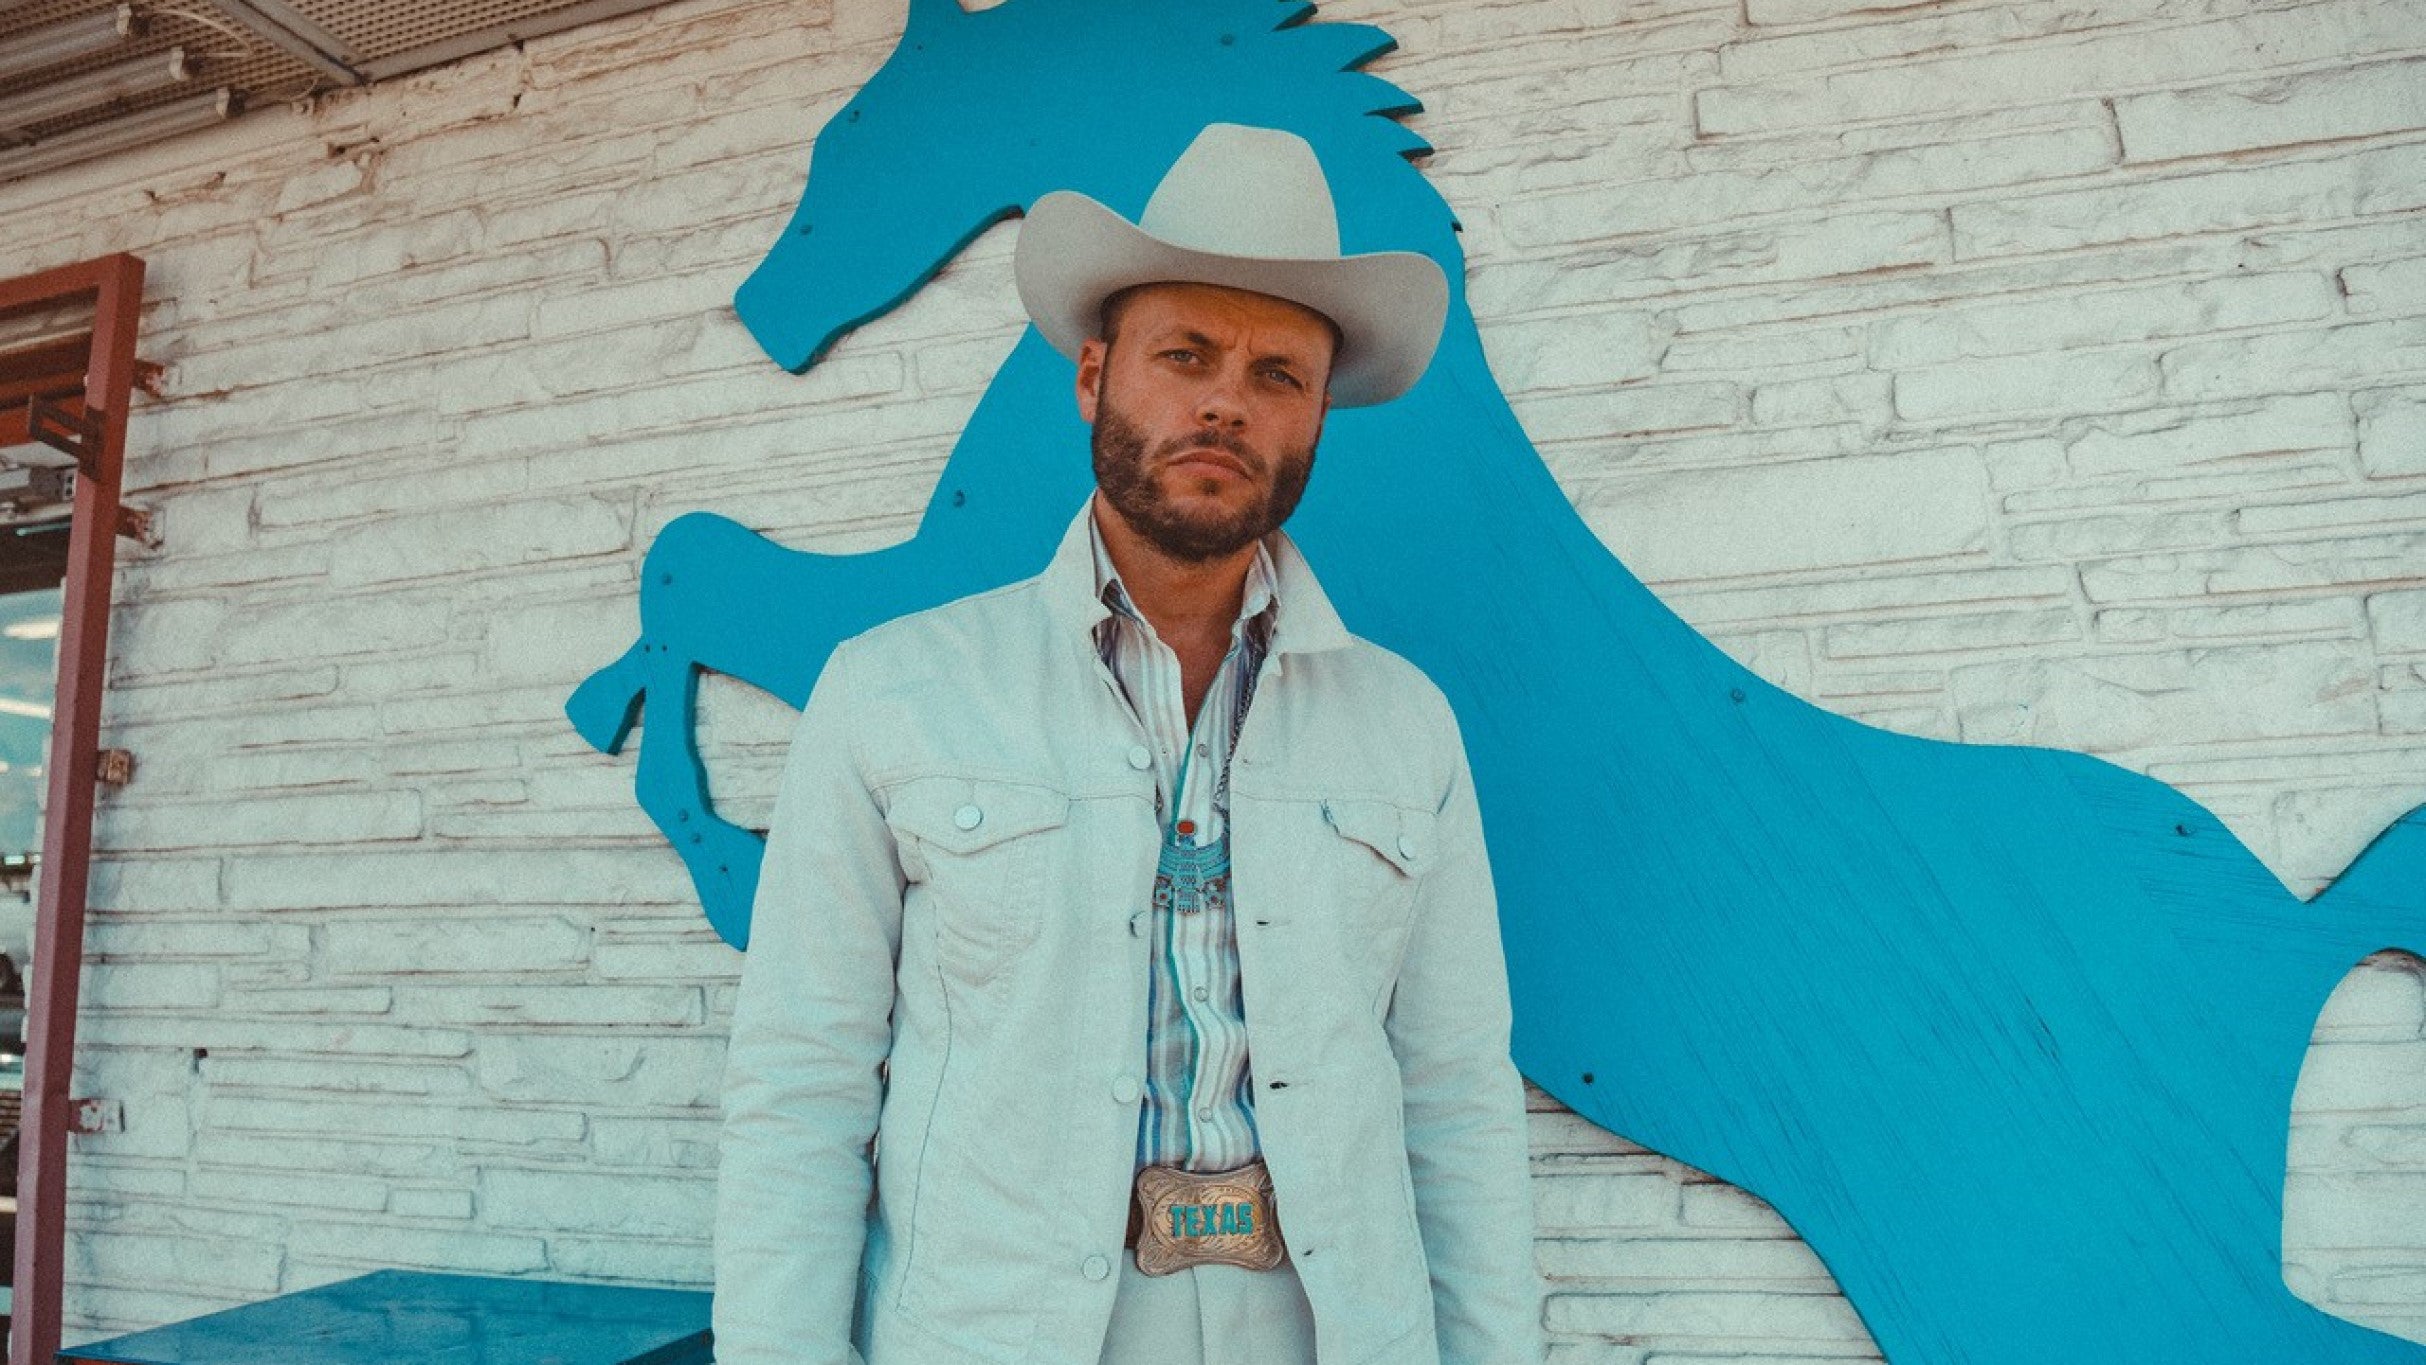 Charley Crockett: $10 Cowboy Tour free presale pa55w0rd for early tickets in Montreal